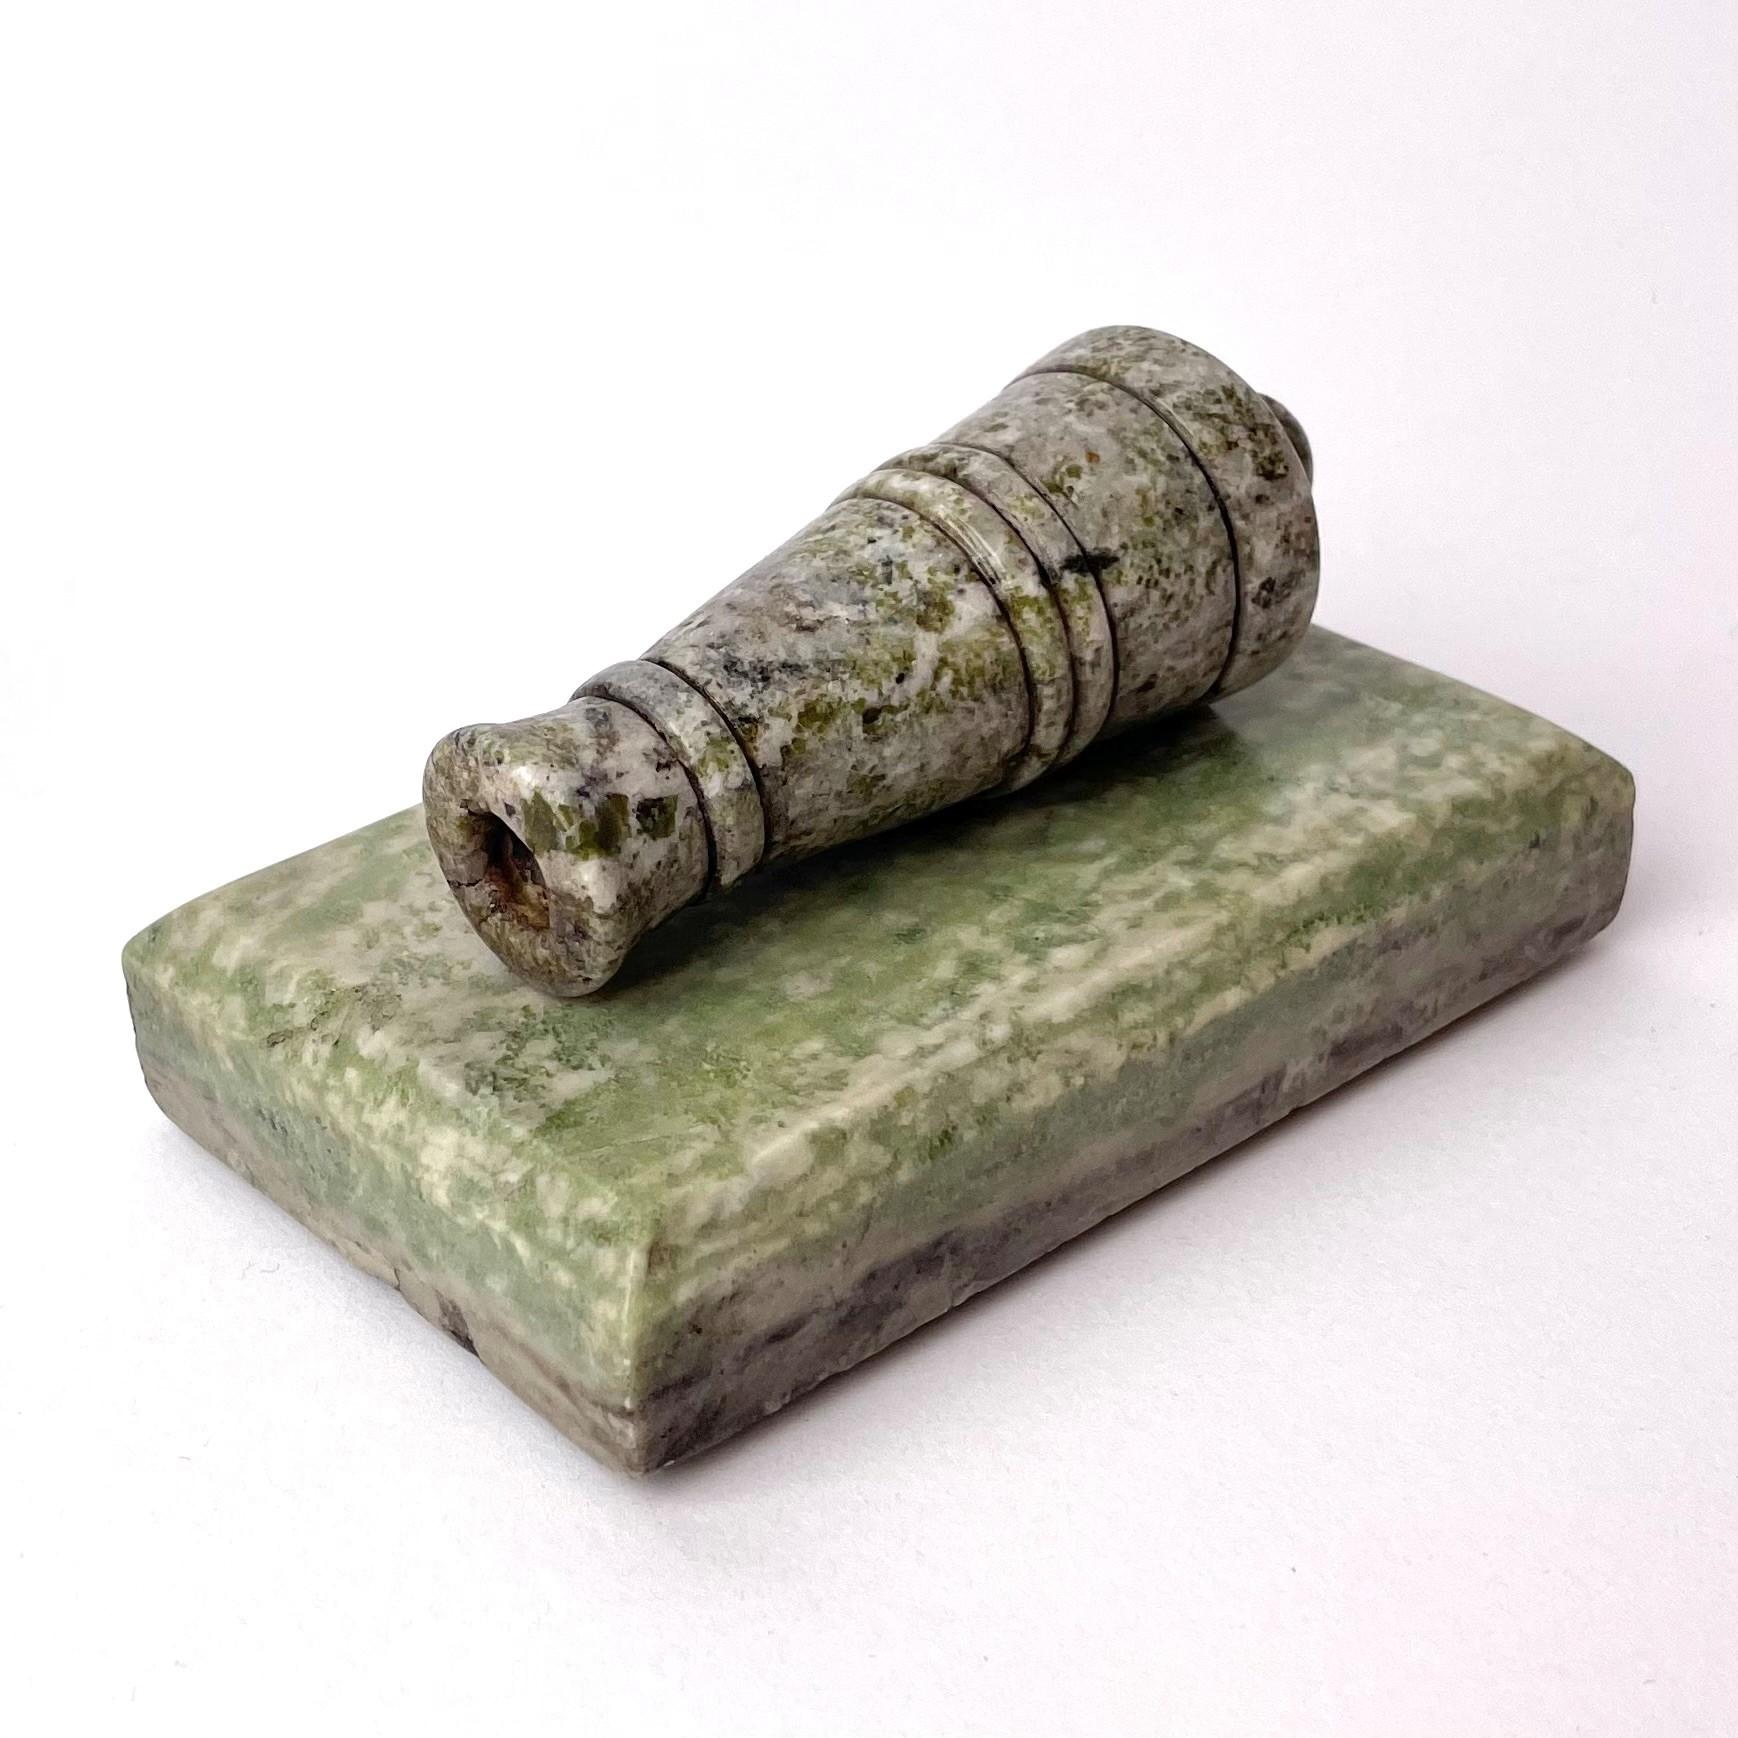 Swedish paperweight in the marble in the shape of a cannon barrel. Beautiful patina. Empire, early 19th century.

Minor chips (se pictures)

Wear consistent with age and use.